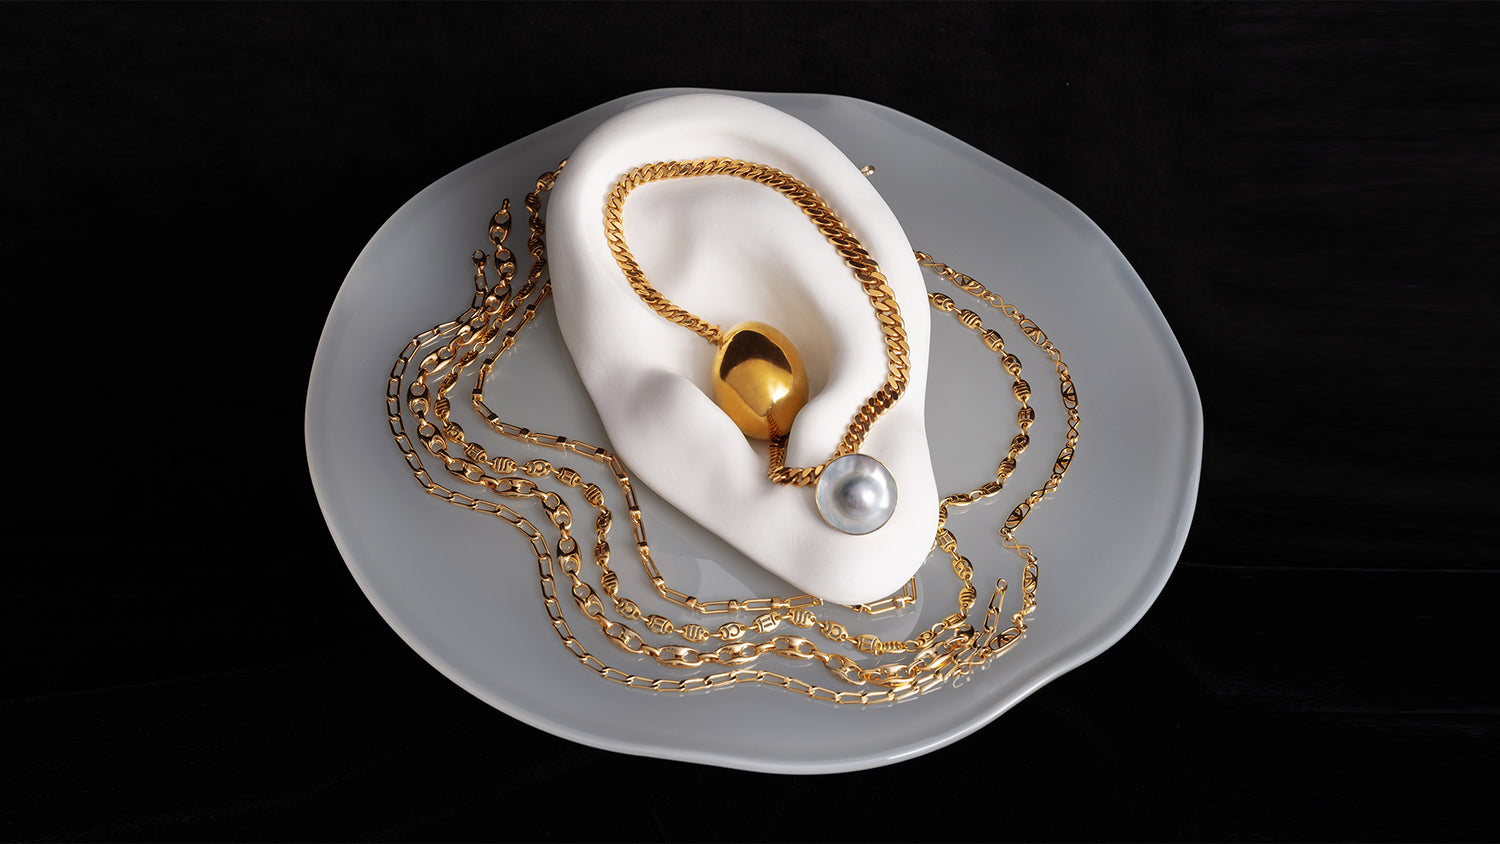 Styled image of various gold chains and pearl earrings on the Bon Bon Cake Stand, on a black background.